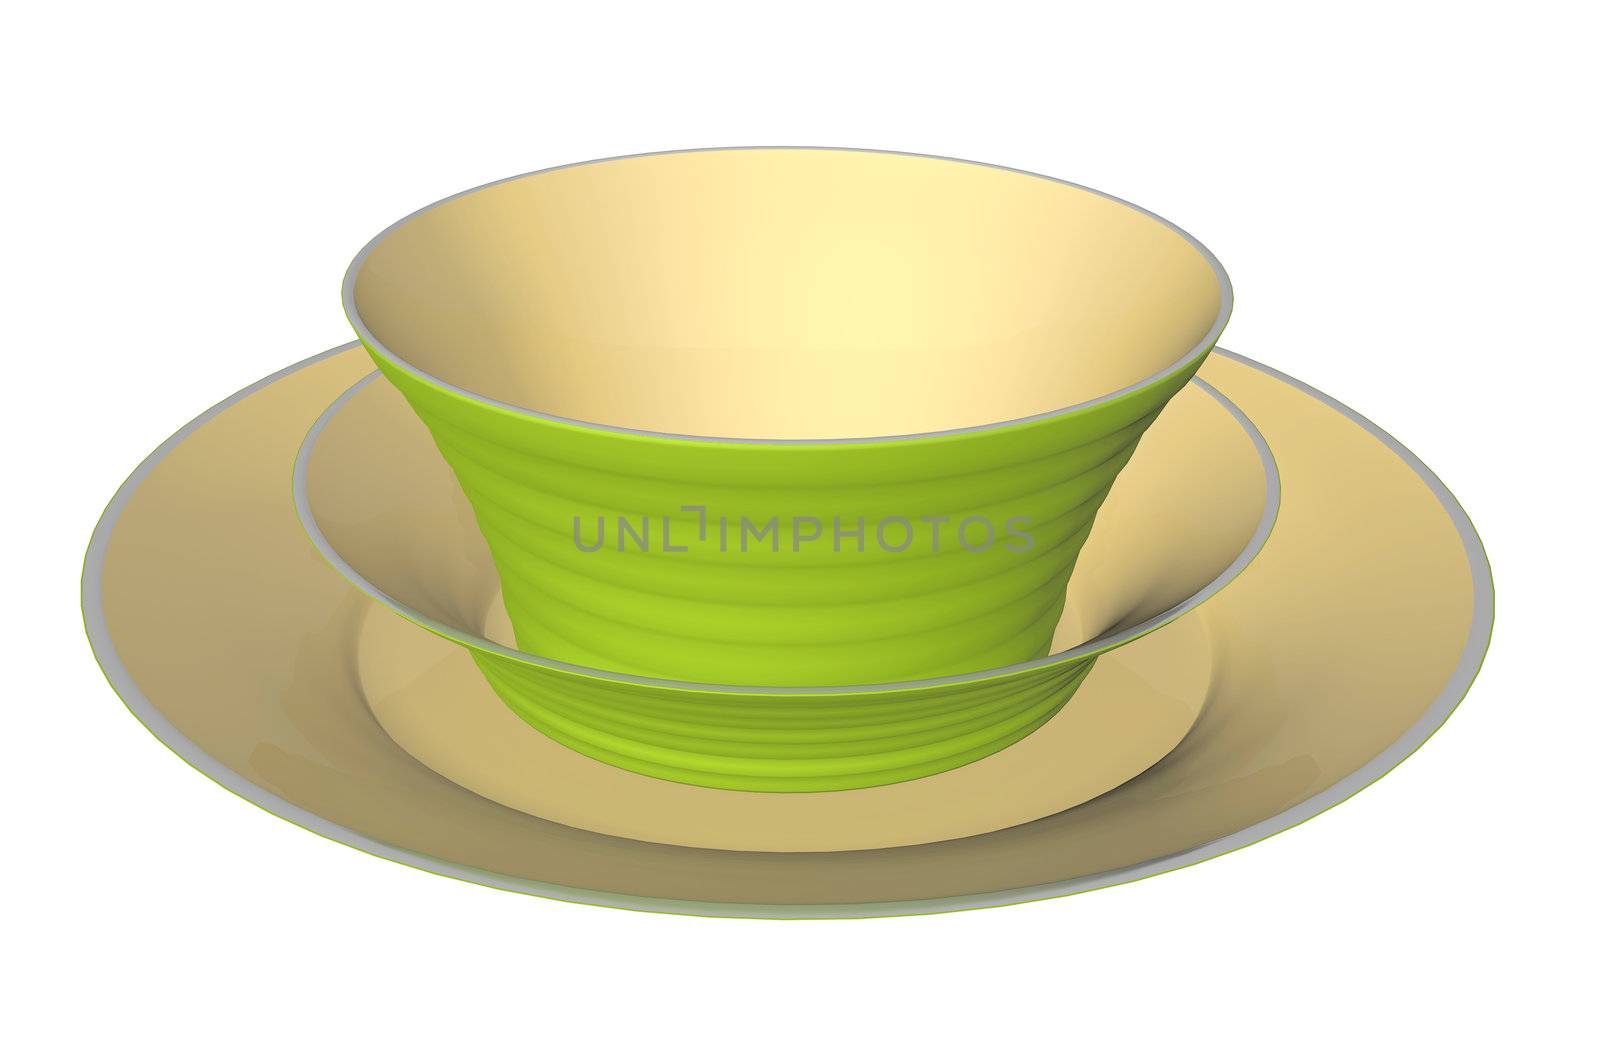 Green and beige ceramic dinner plate and bowls, 3D illustration by Morphart